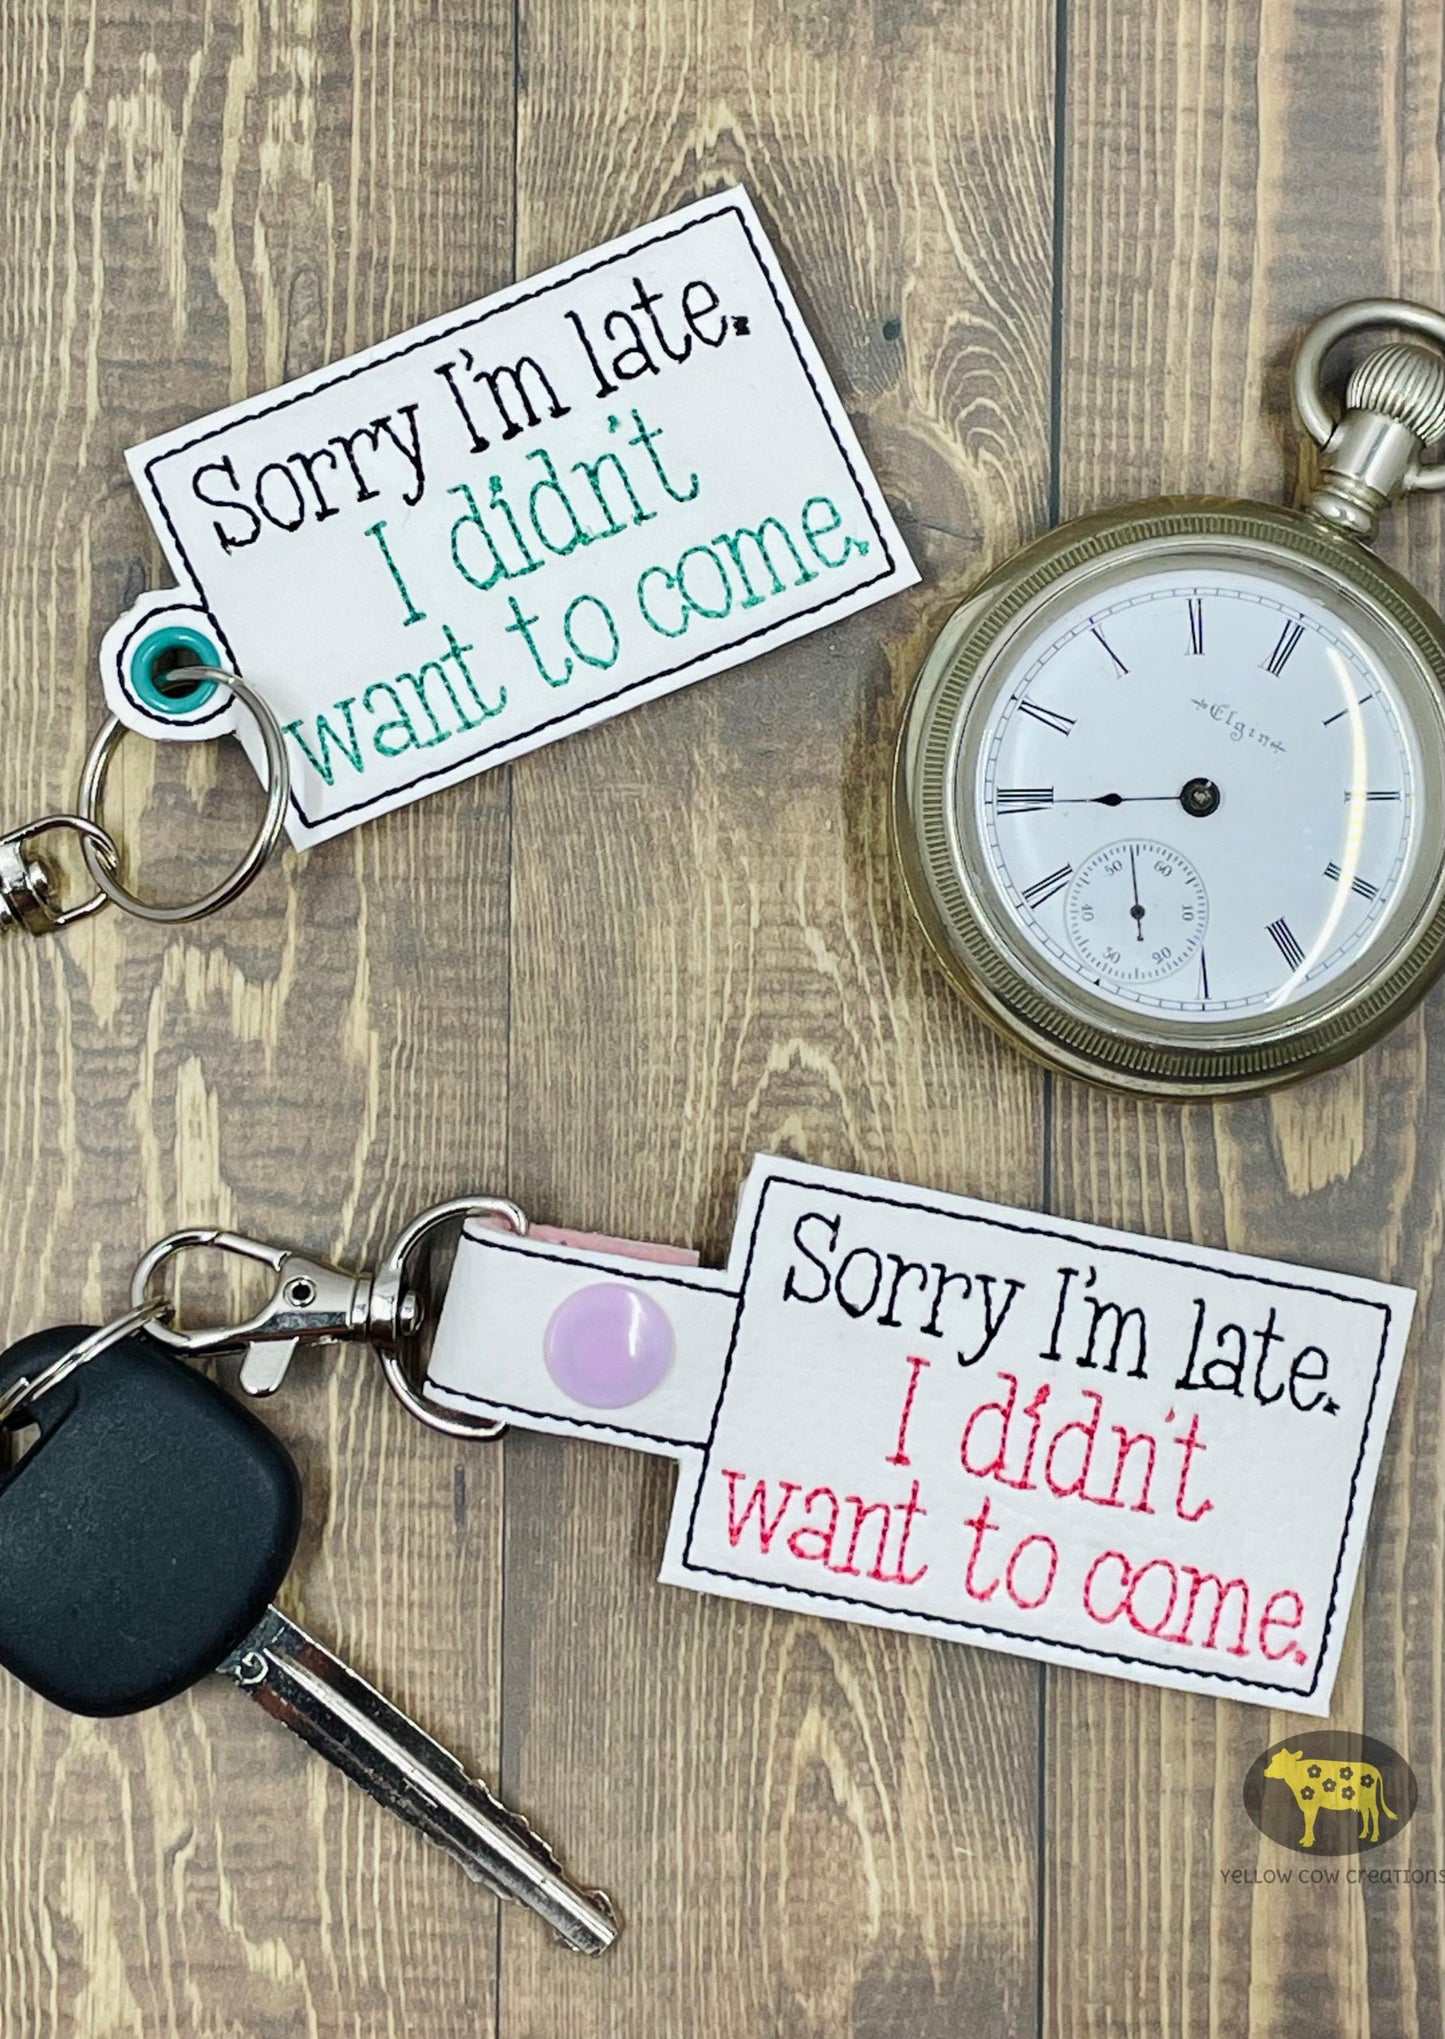 I didn't want to come Fobs - DIGITAL Embroidery DESIGN